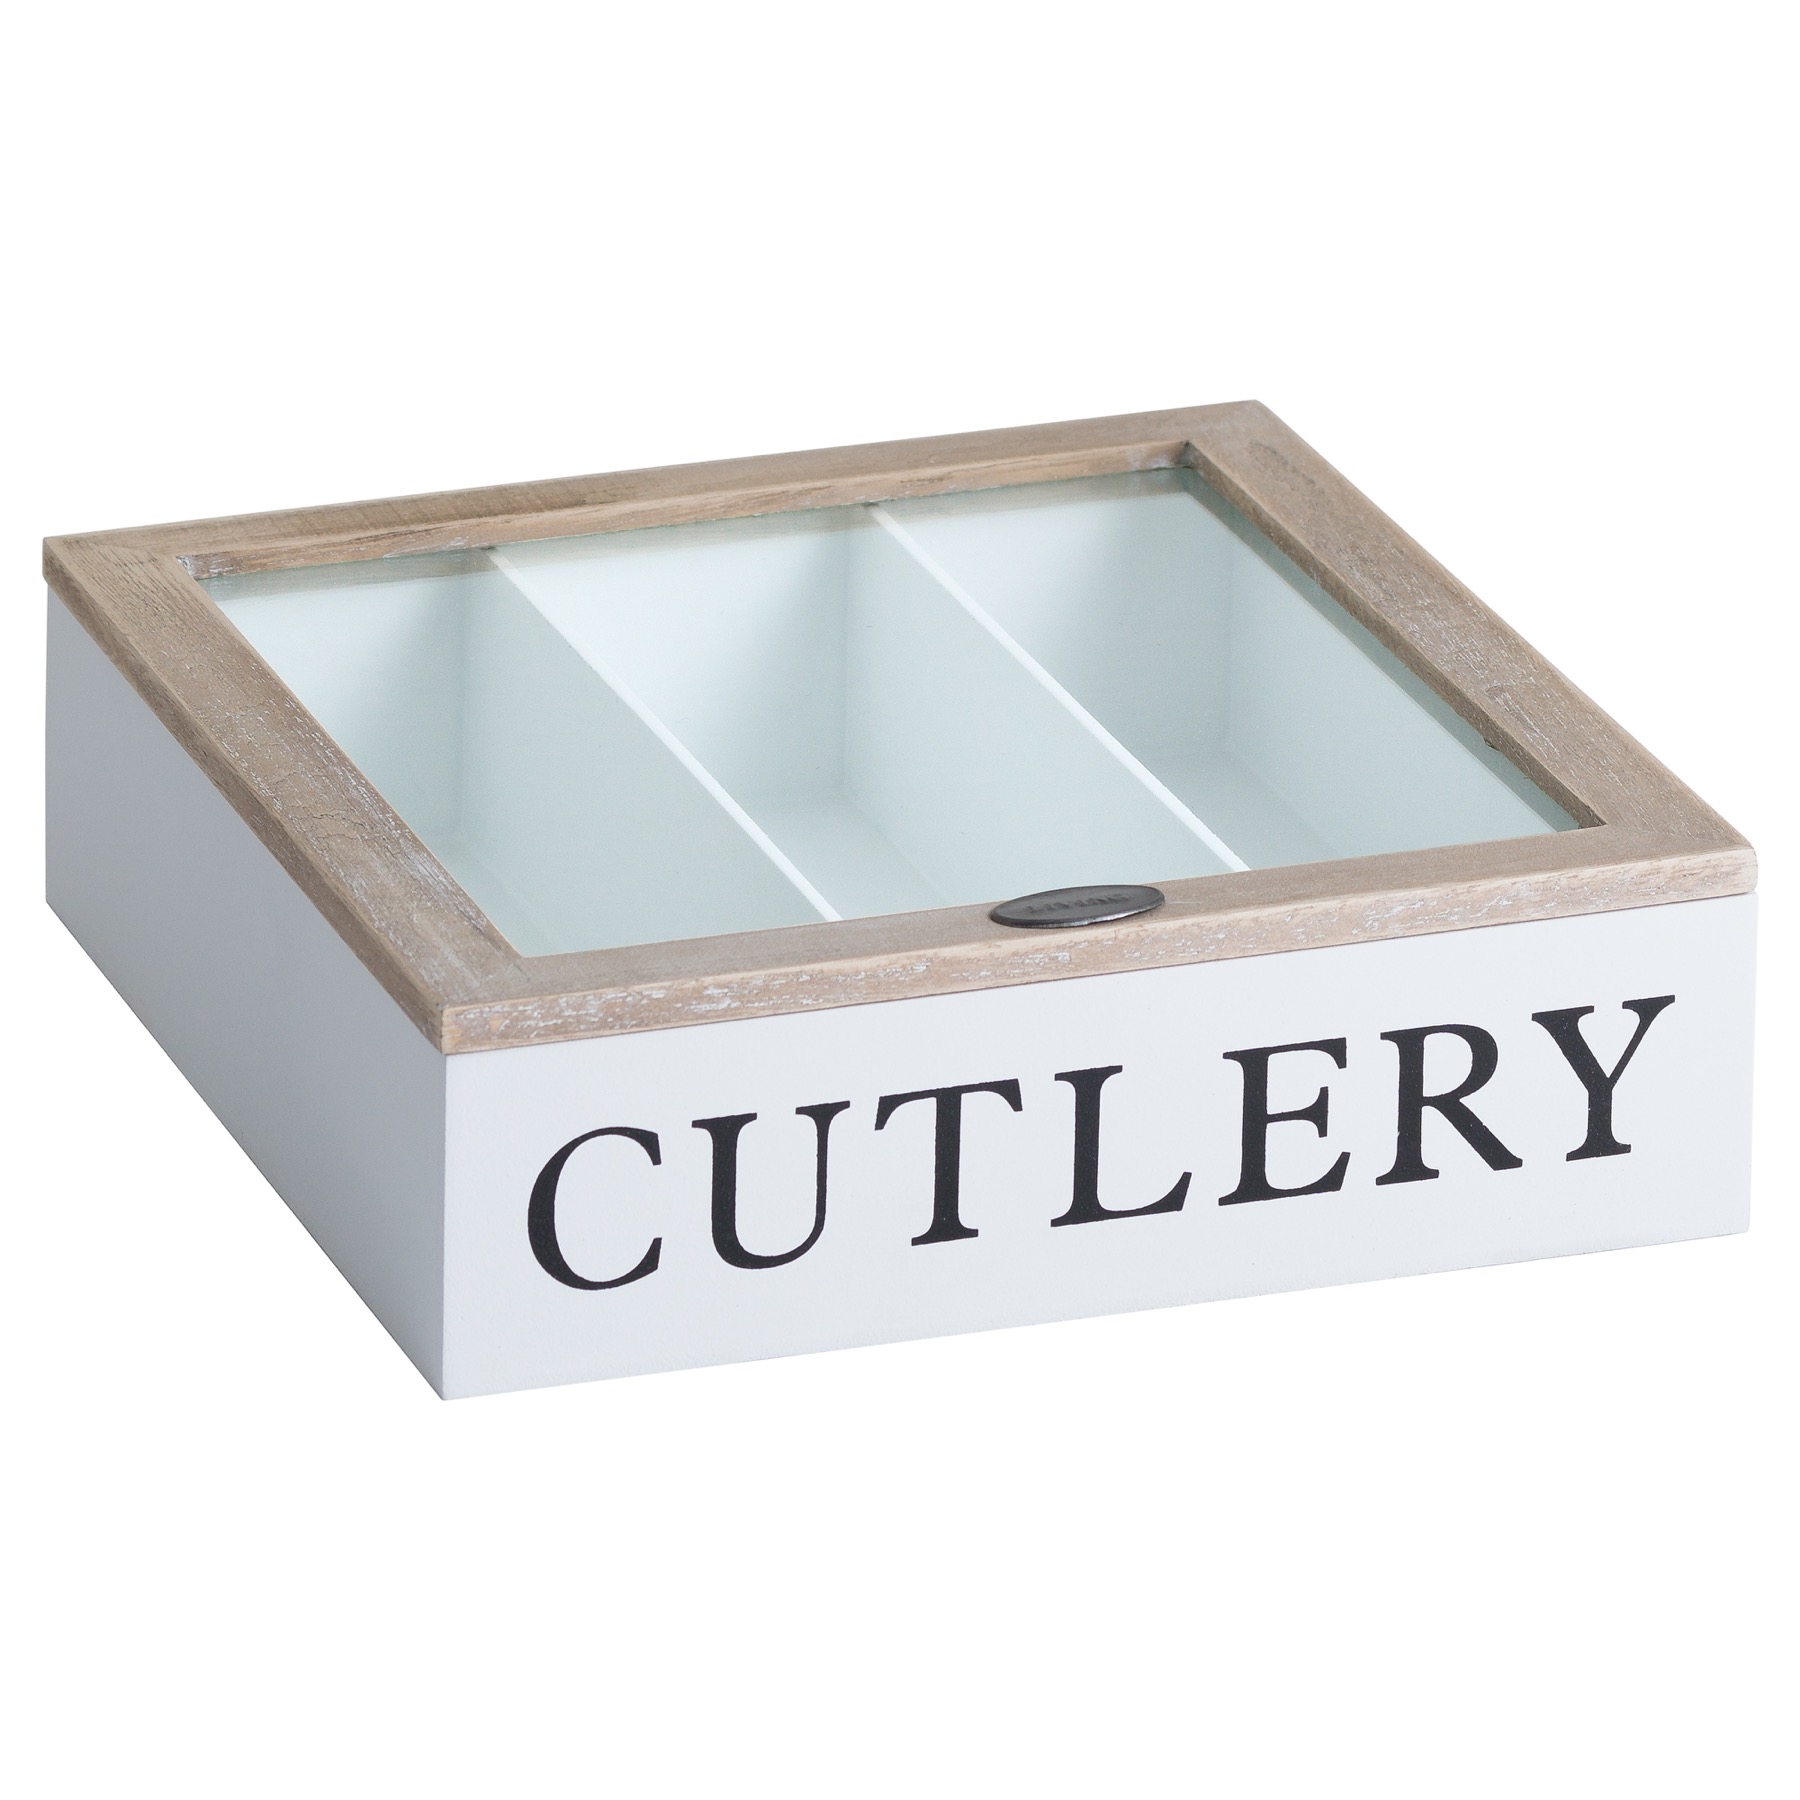 Country Cutlery Box - Image 1